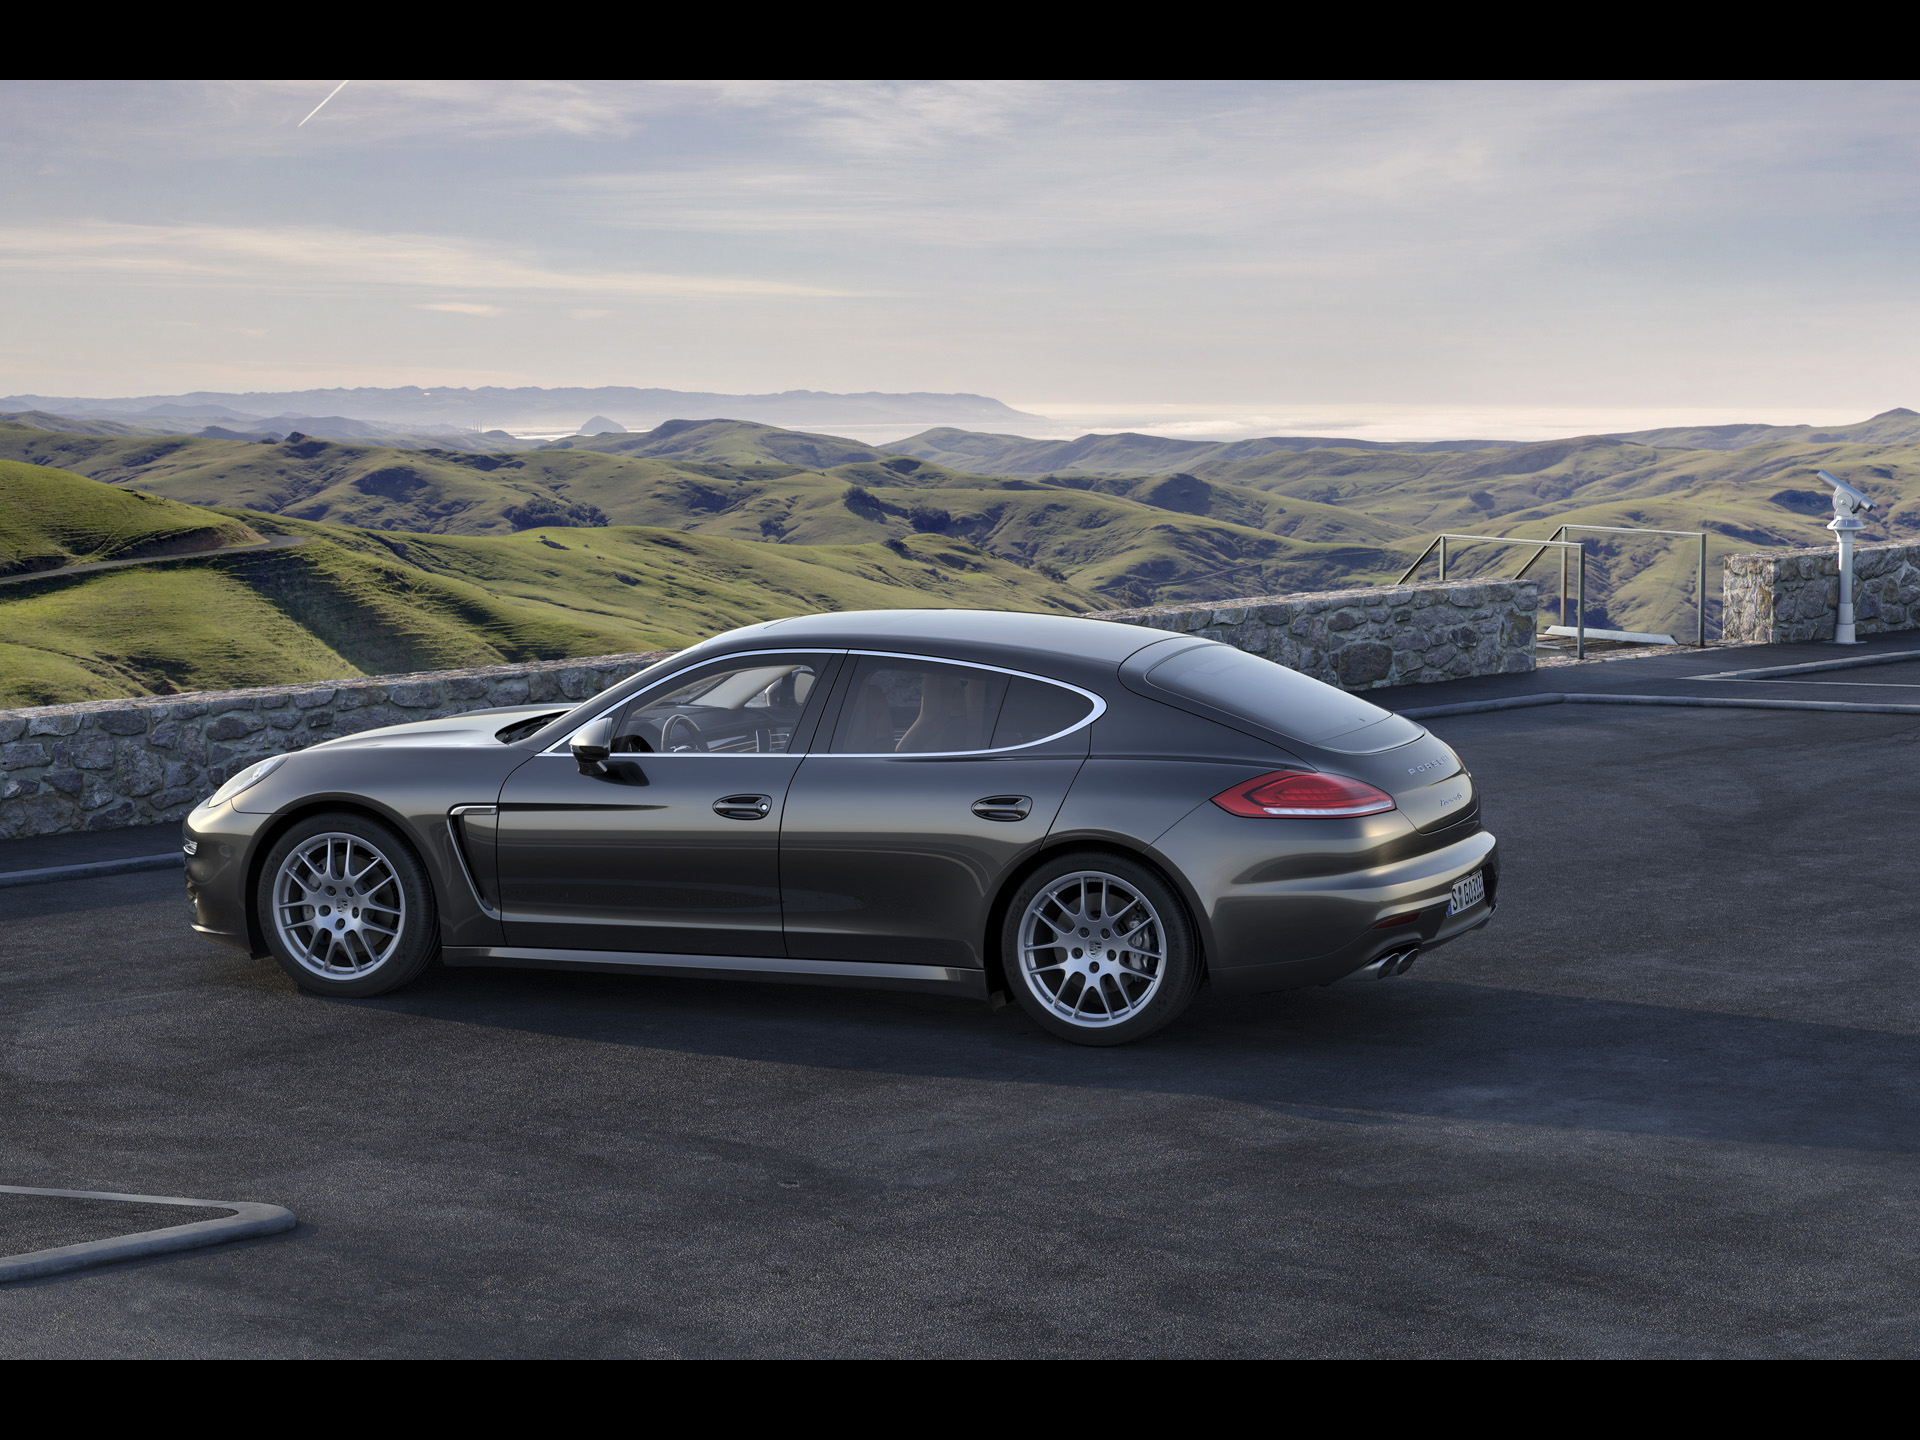 70+ Porsche Panamera HD Wallpapers and Backgrounds